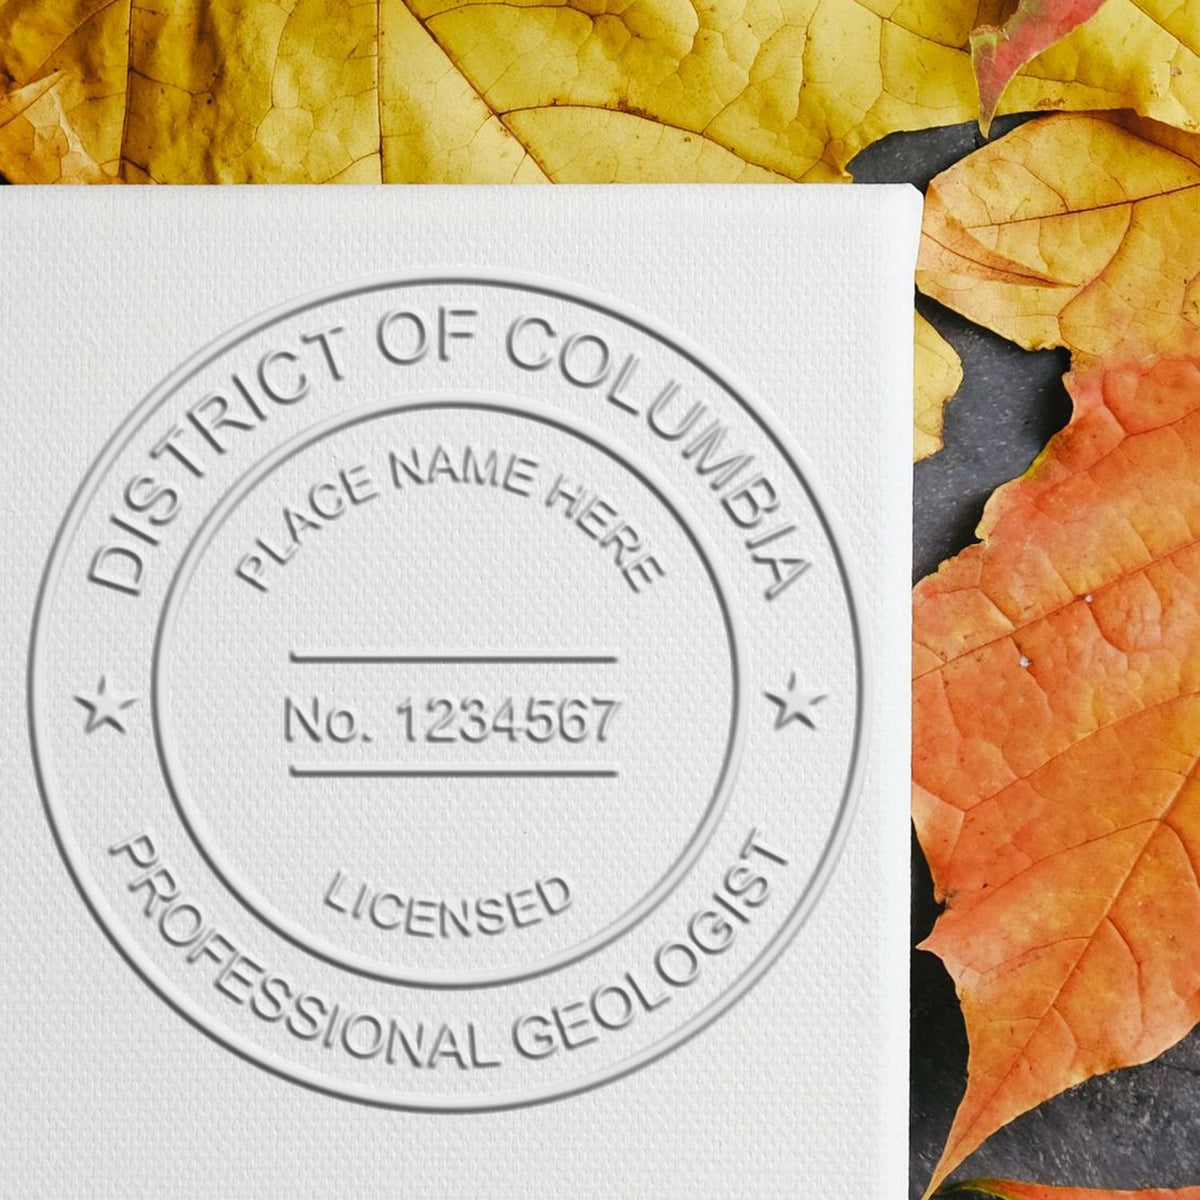 An alternative view of the Soft District of Columbia Professional Geologist Seal stamped on a sheet of paper showing the image in use